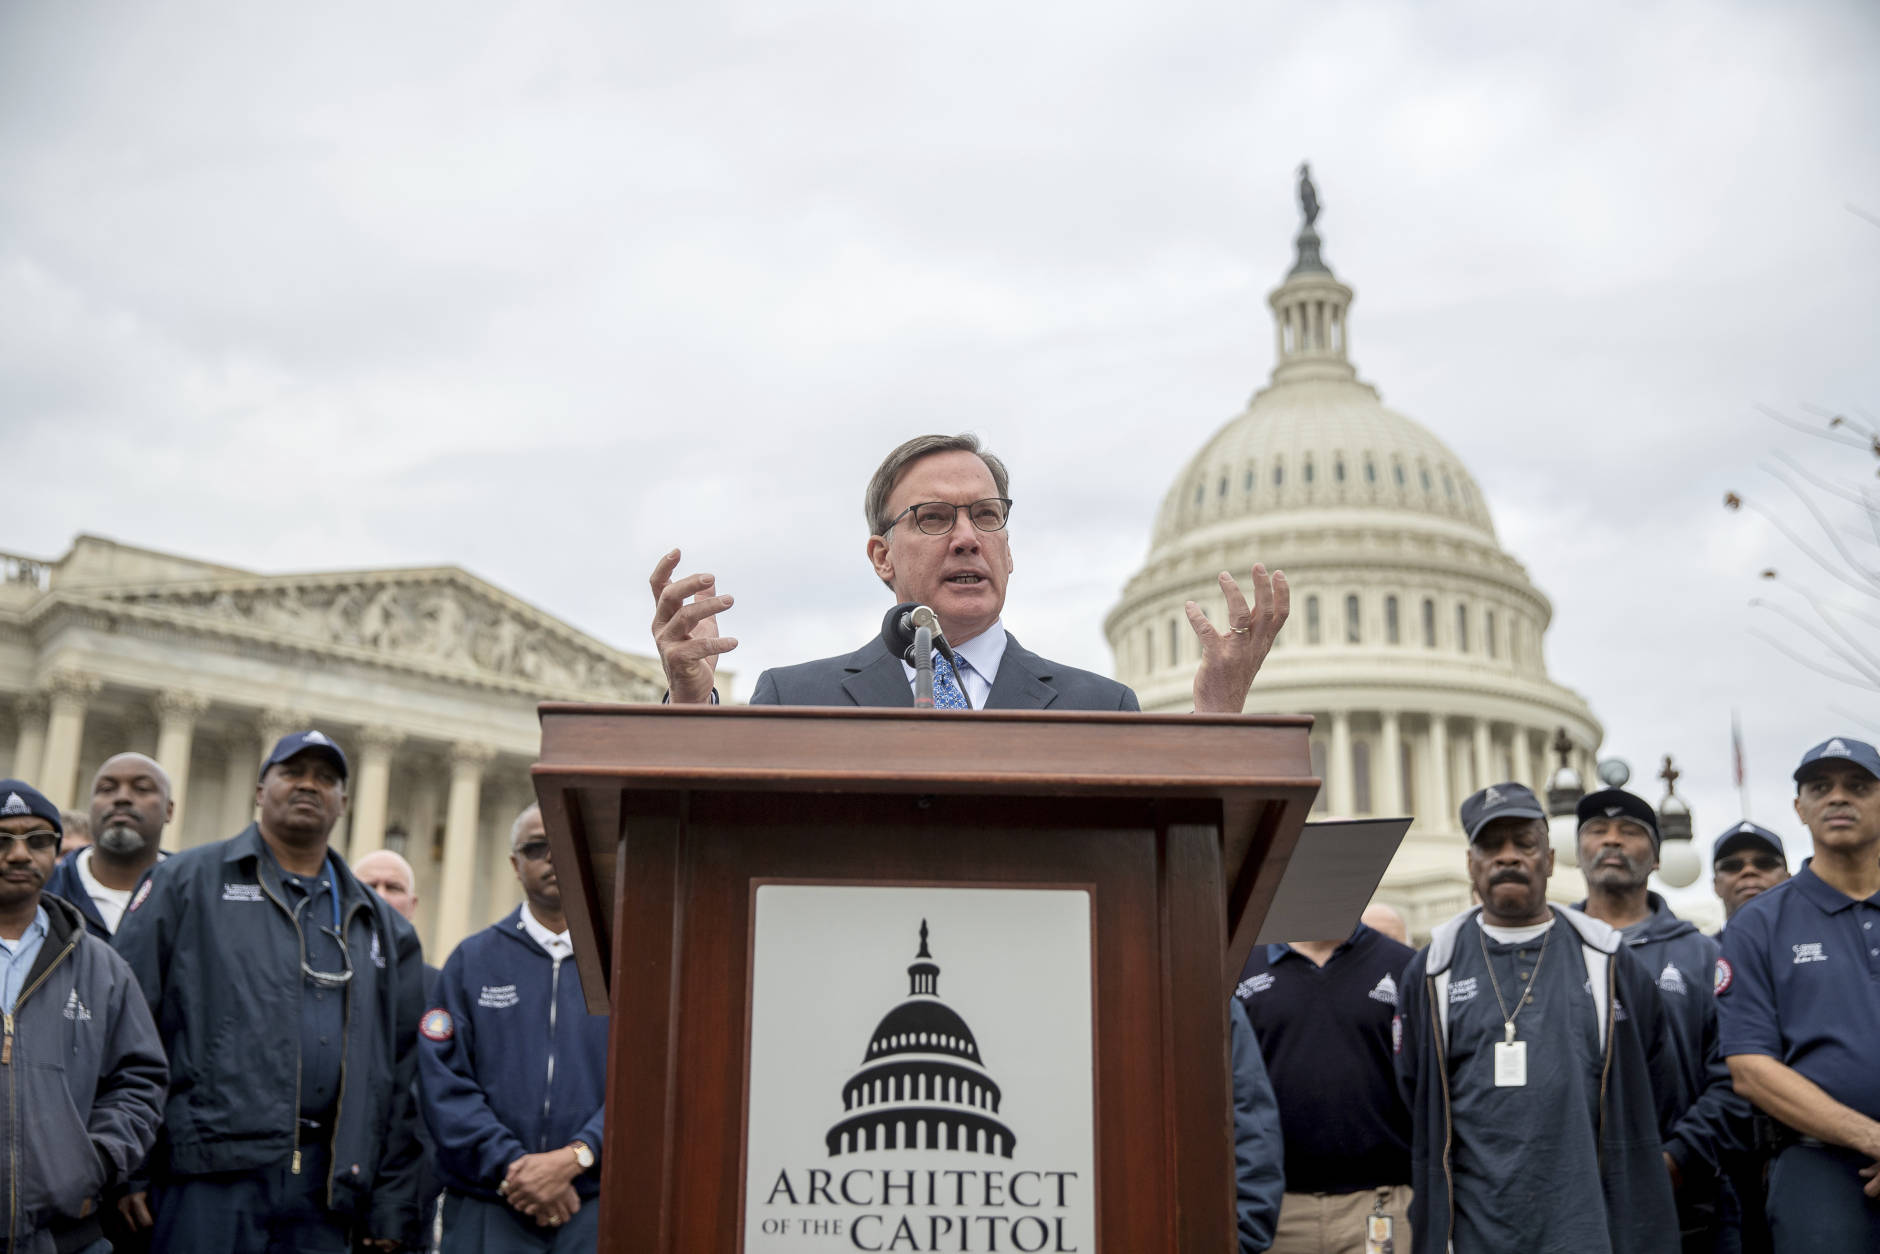 Architect of the Capitol Stephen T. Ayers, center, accompanied by Architect of the Capitol staff, speaks at a news conference on Capitol Hill in Washington, Tuesday, Nov. 15, 2016, to announce the successful completion of the U.S. Capitol Dome Restoration Project. (AP Photo/Andrew Harnik)